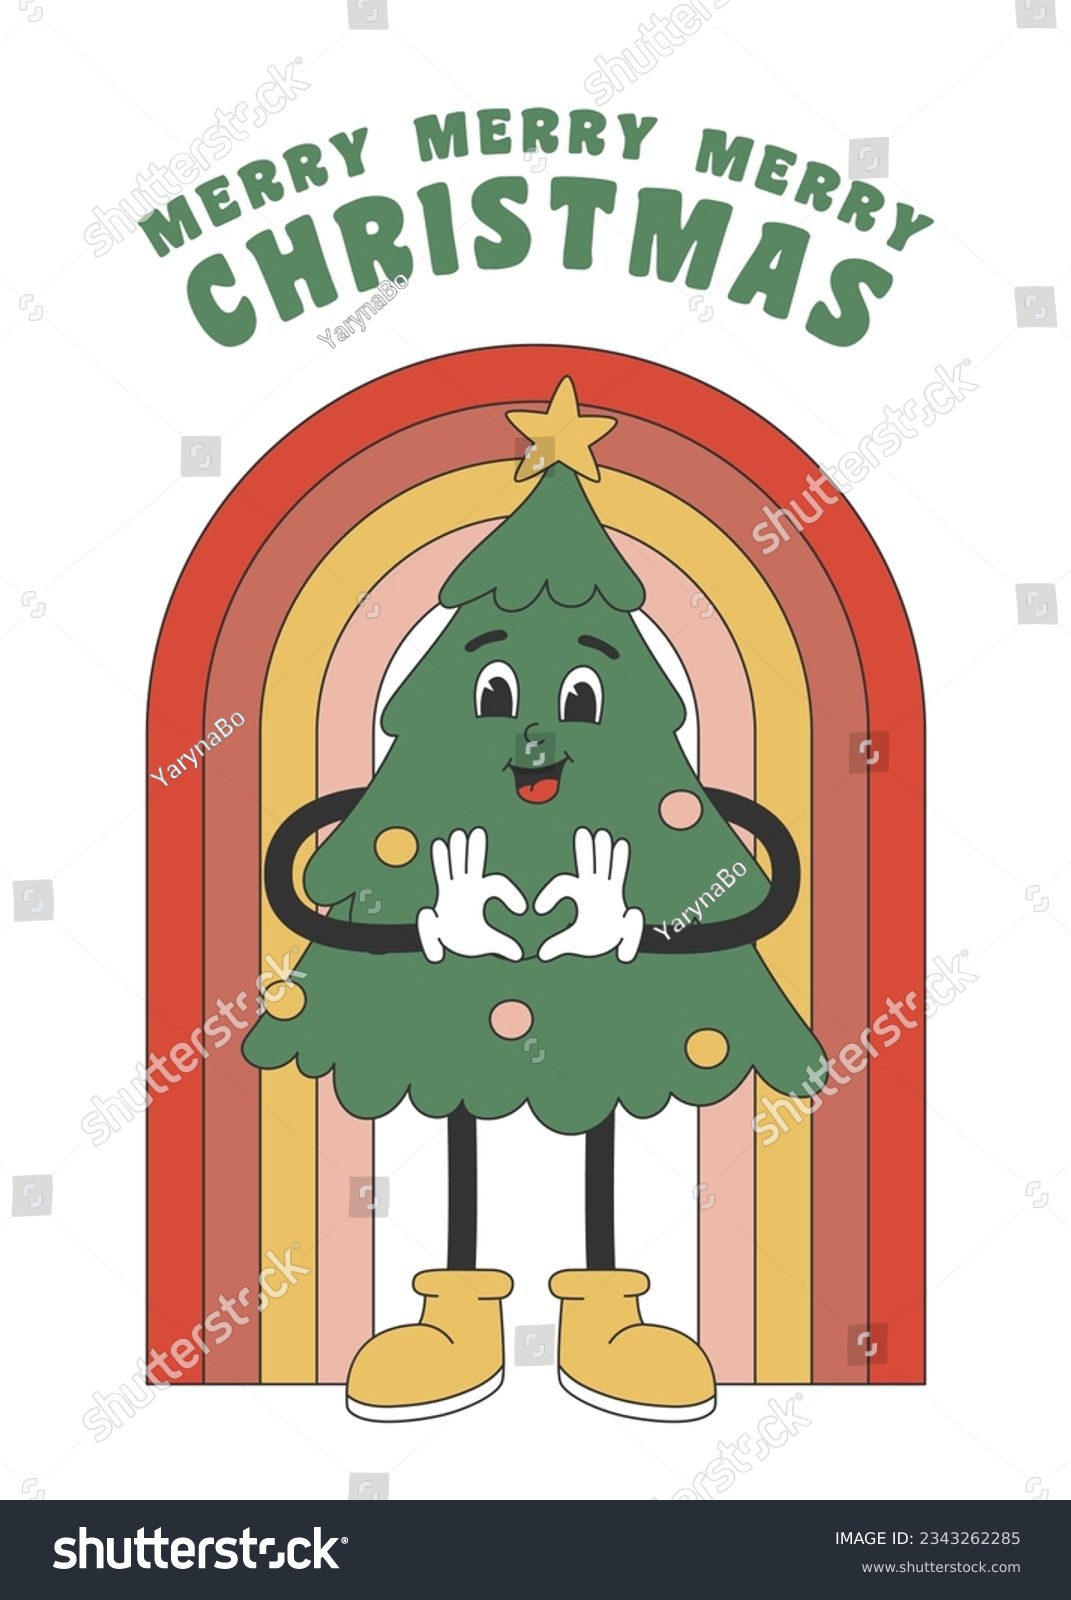 SVG of Greeting card with christmas tree in groovy retro style. Template for Merry Christmas and Happy New year greeting card, poster, party invitation. Vector illustration svg